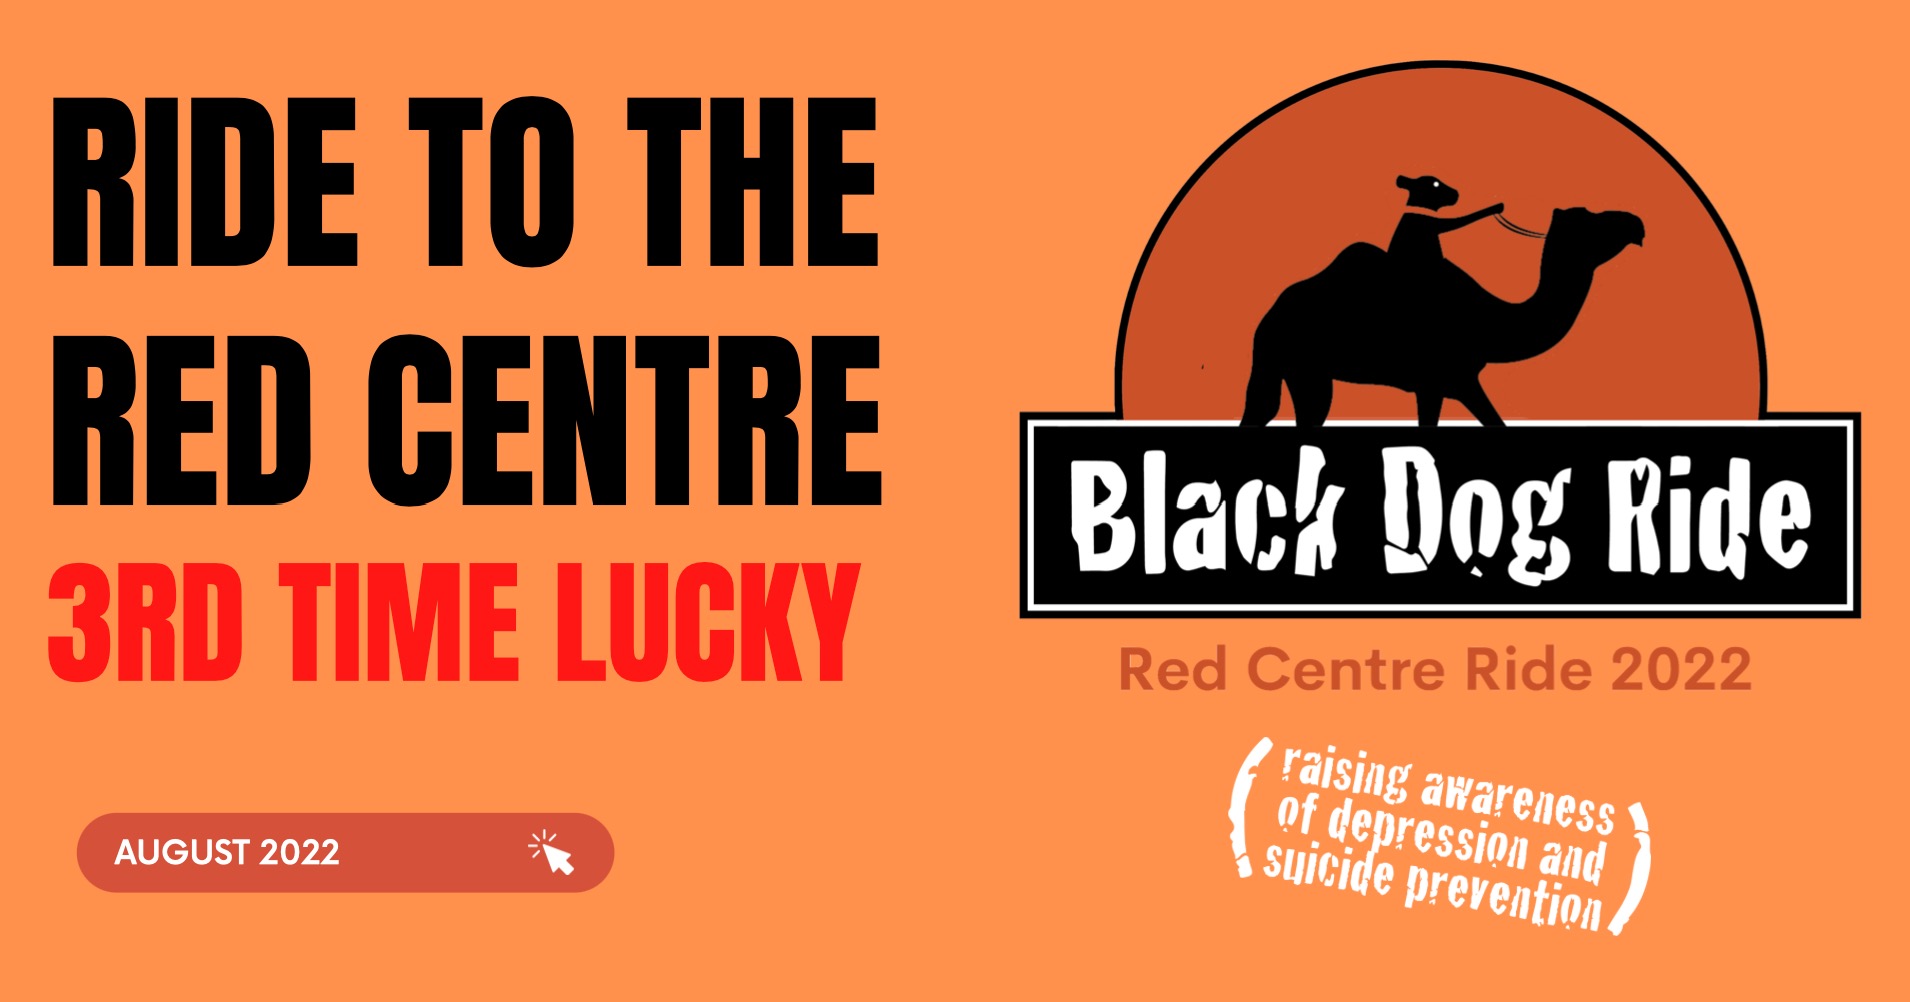 Black Dog Ride to the Red Centre 2022